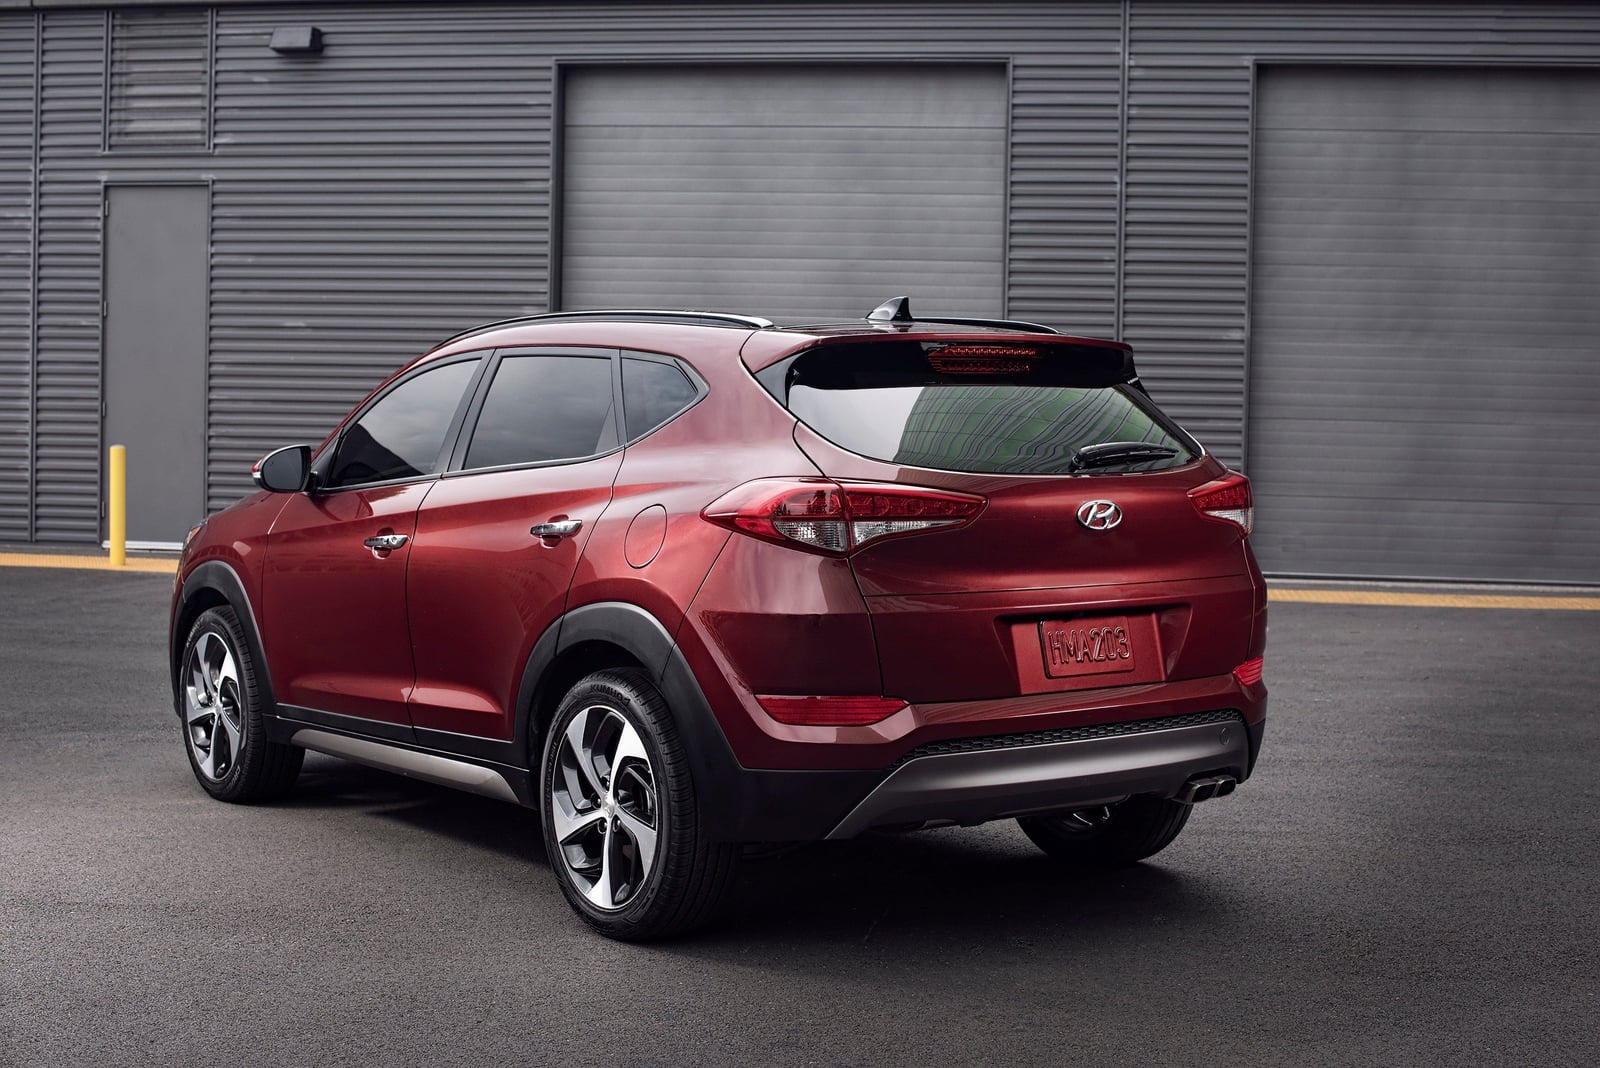 2018 Hyundai Tucson Deals, Prices, Incentives & Leases, Overview ...